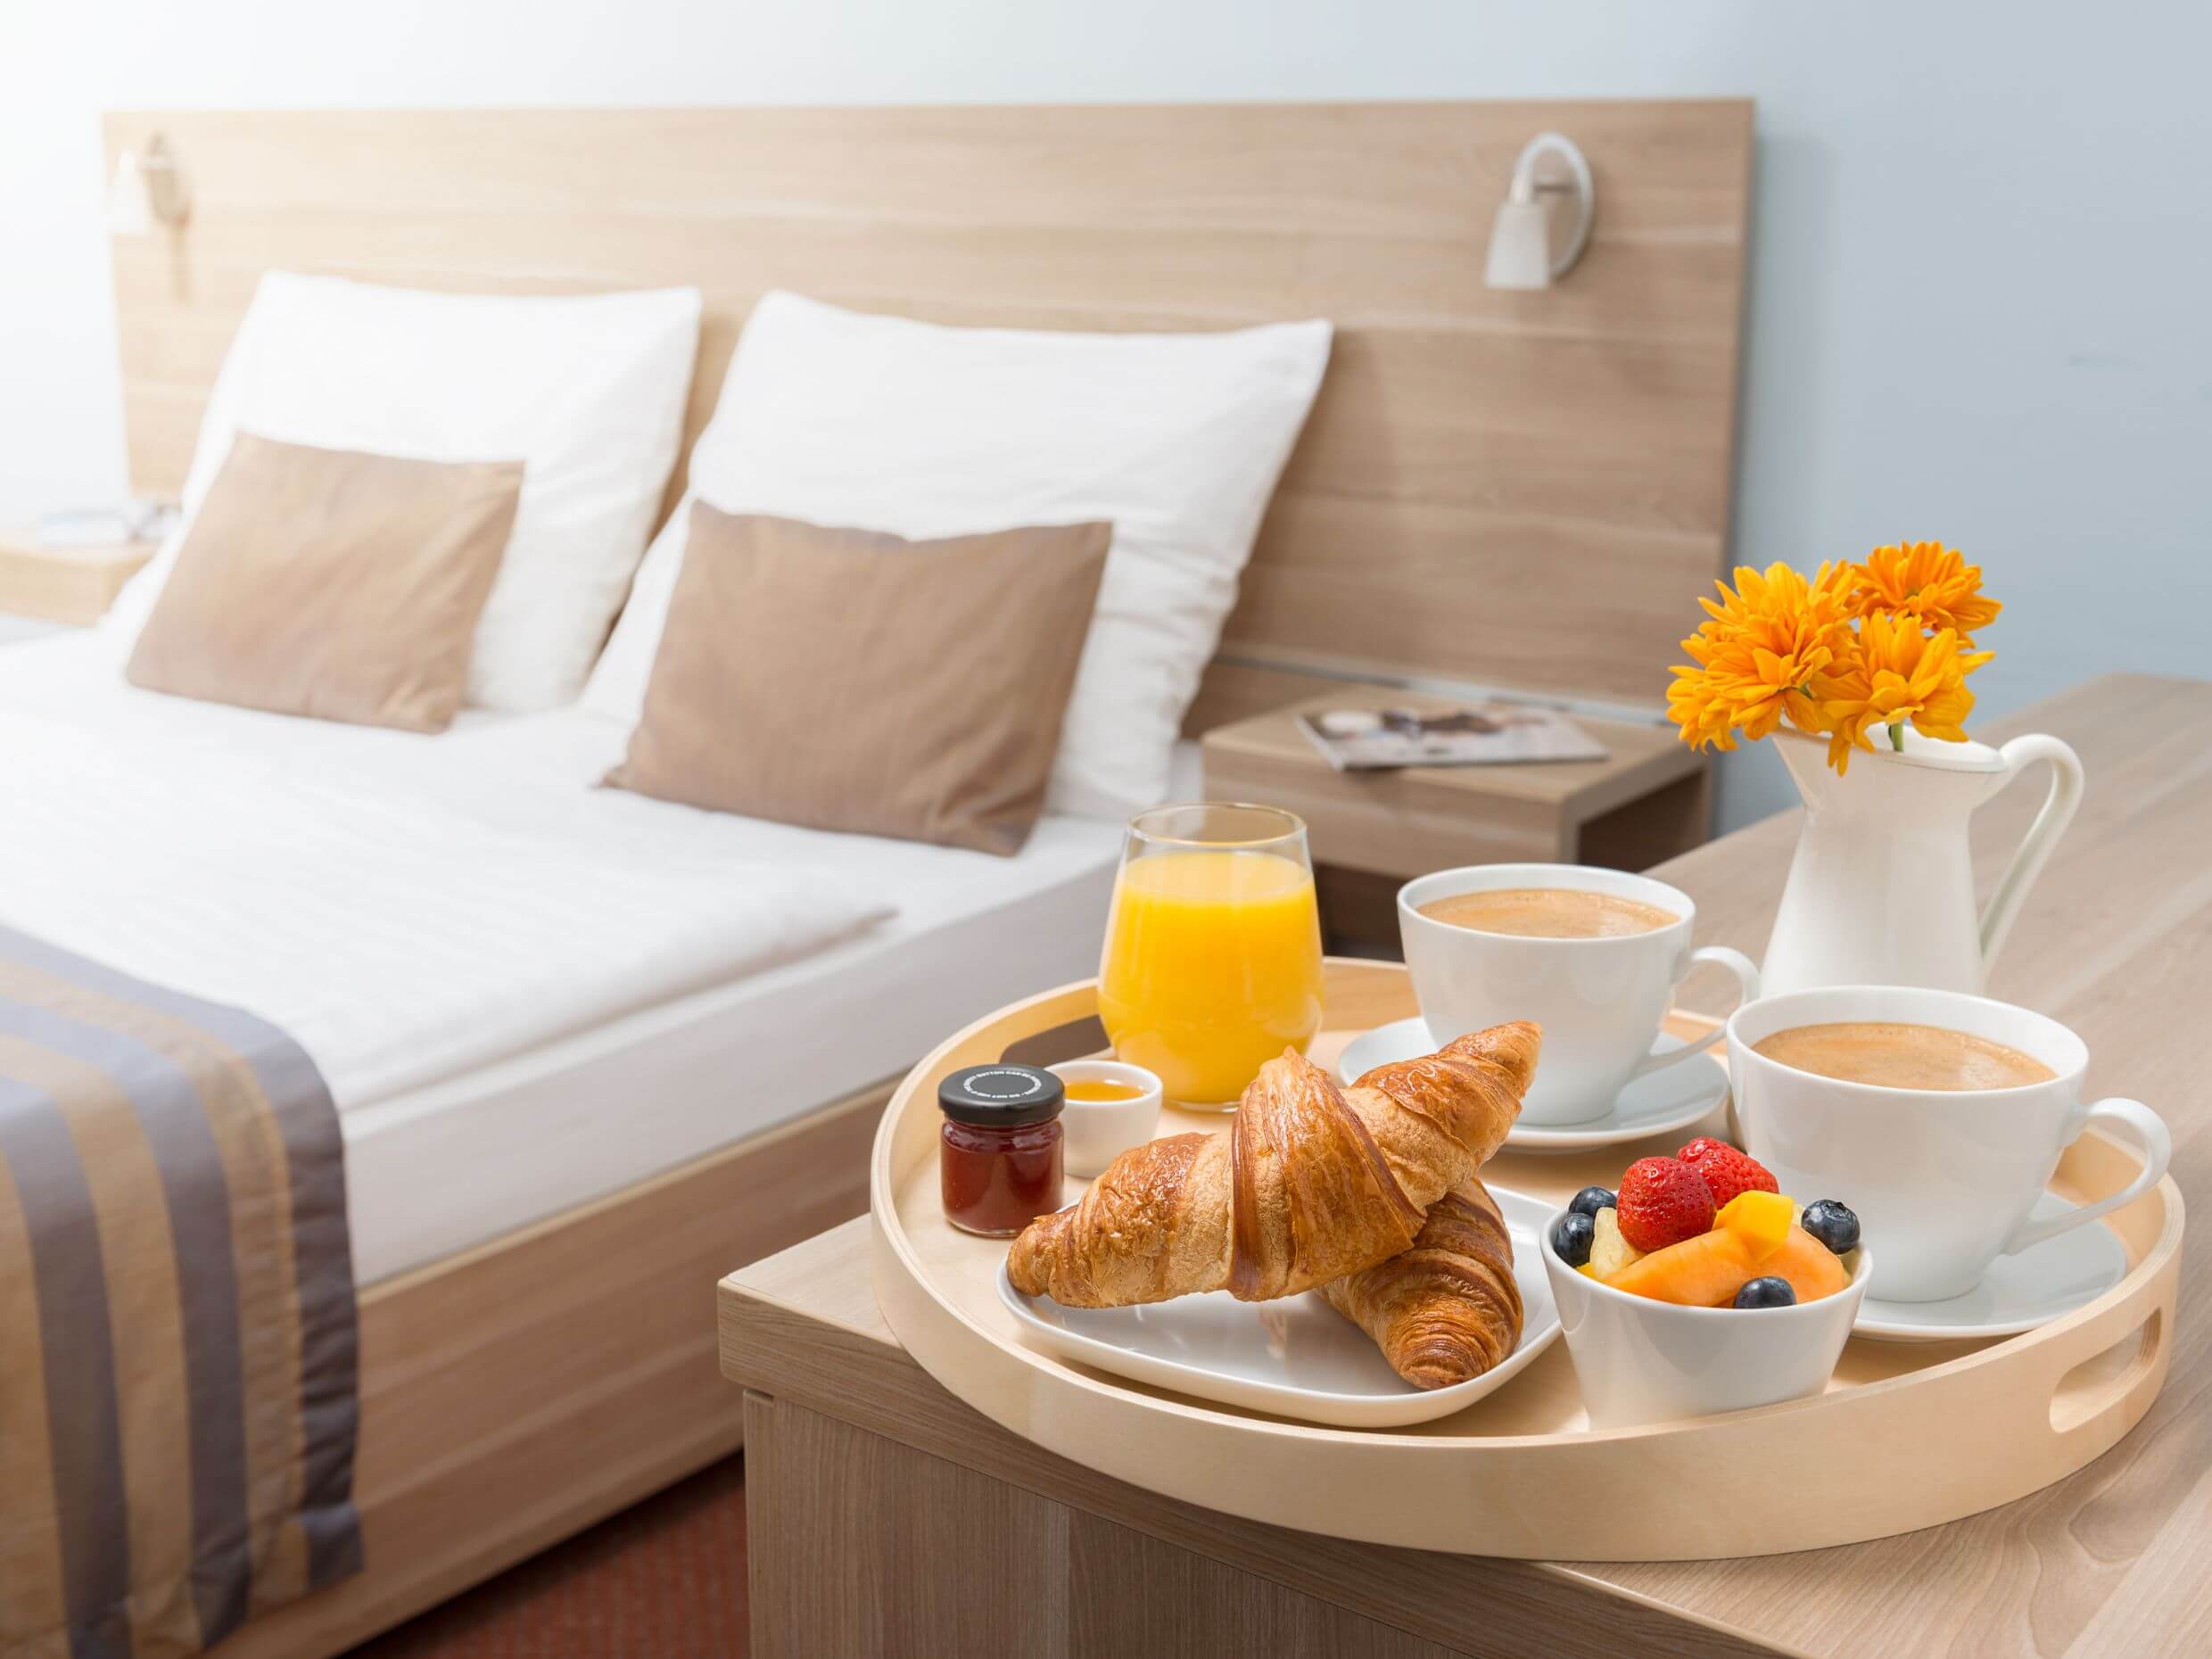 hotel room with breakfast laid out as an experience managed by a hospitality business manager.